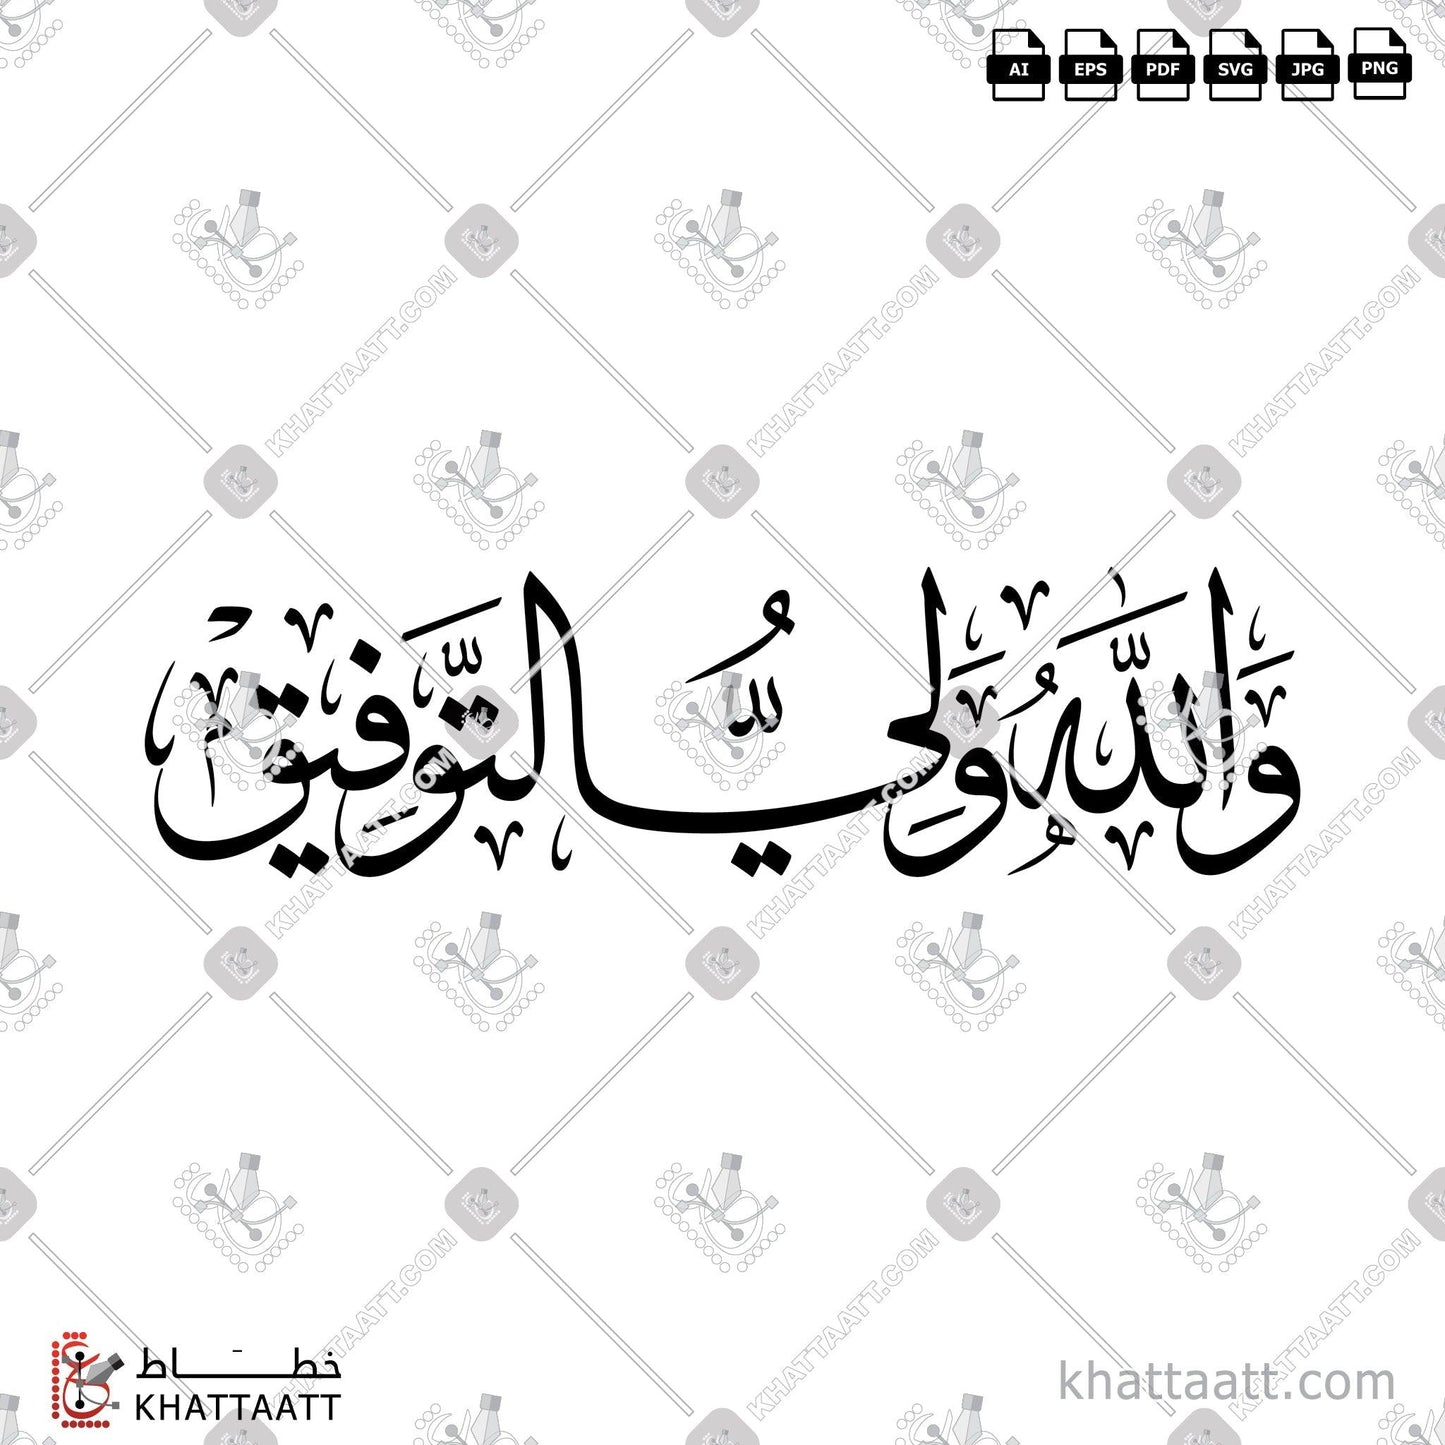 Download Arabic Calligraphy of الله ولي التوفيق in Thuluth - خط الثلث in vector and .png